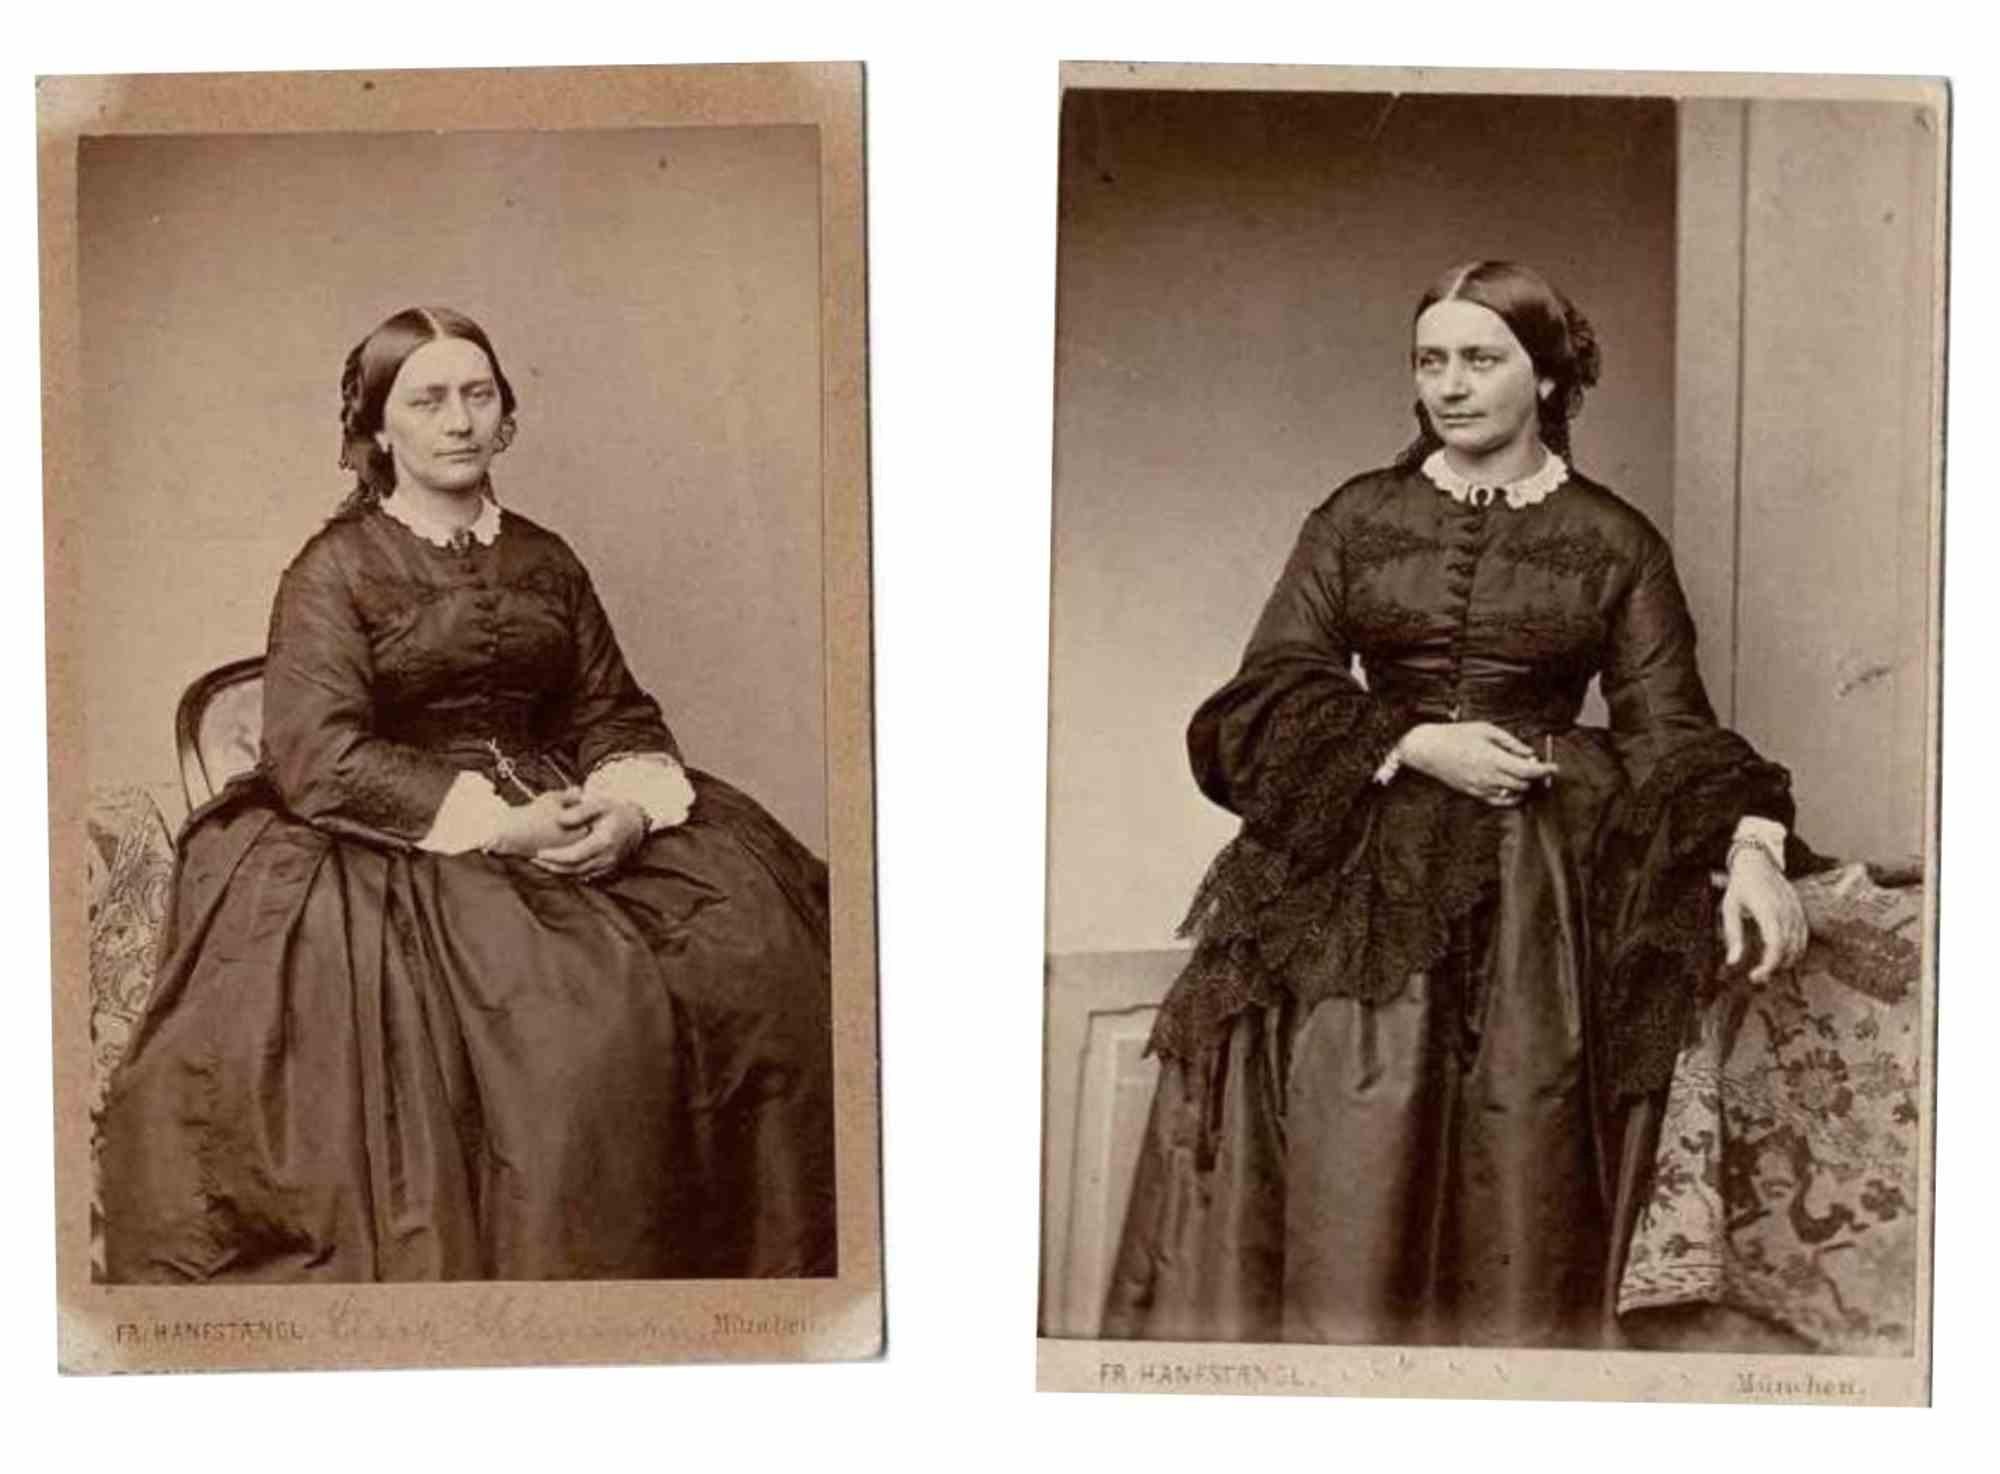 Unknown Figurative Photograph - Two Photographic Portraits of Clara Schumann - 1860s